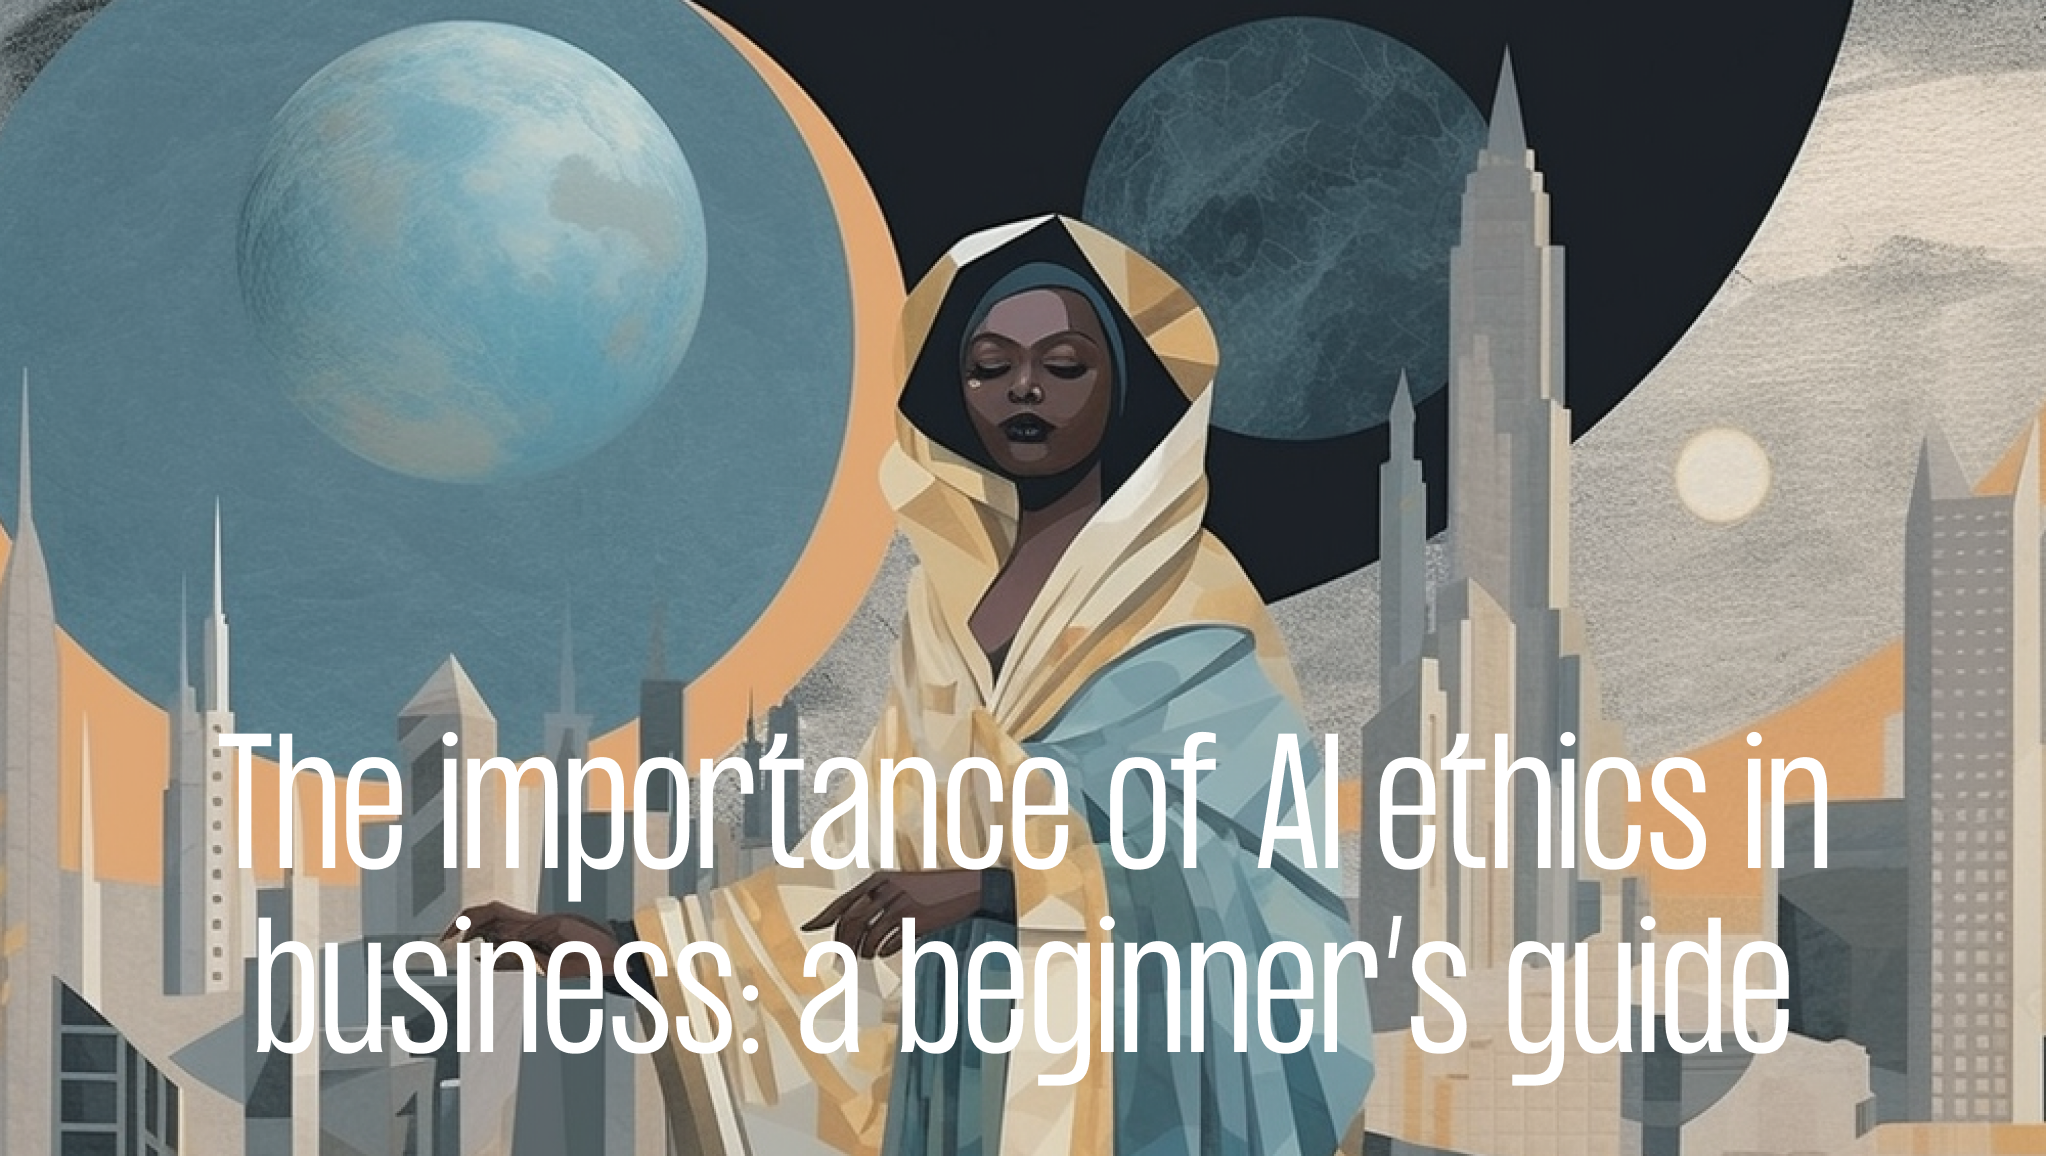 The importance of AI ethics in business: a beginner's guide